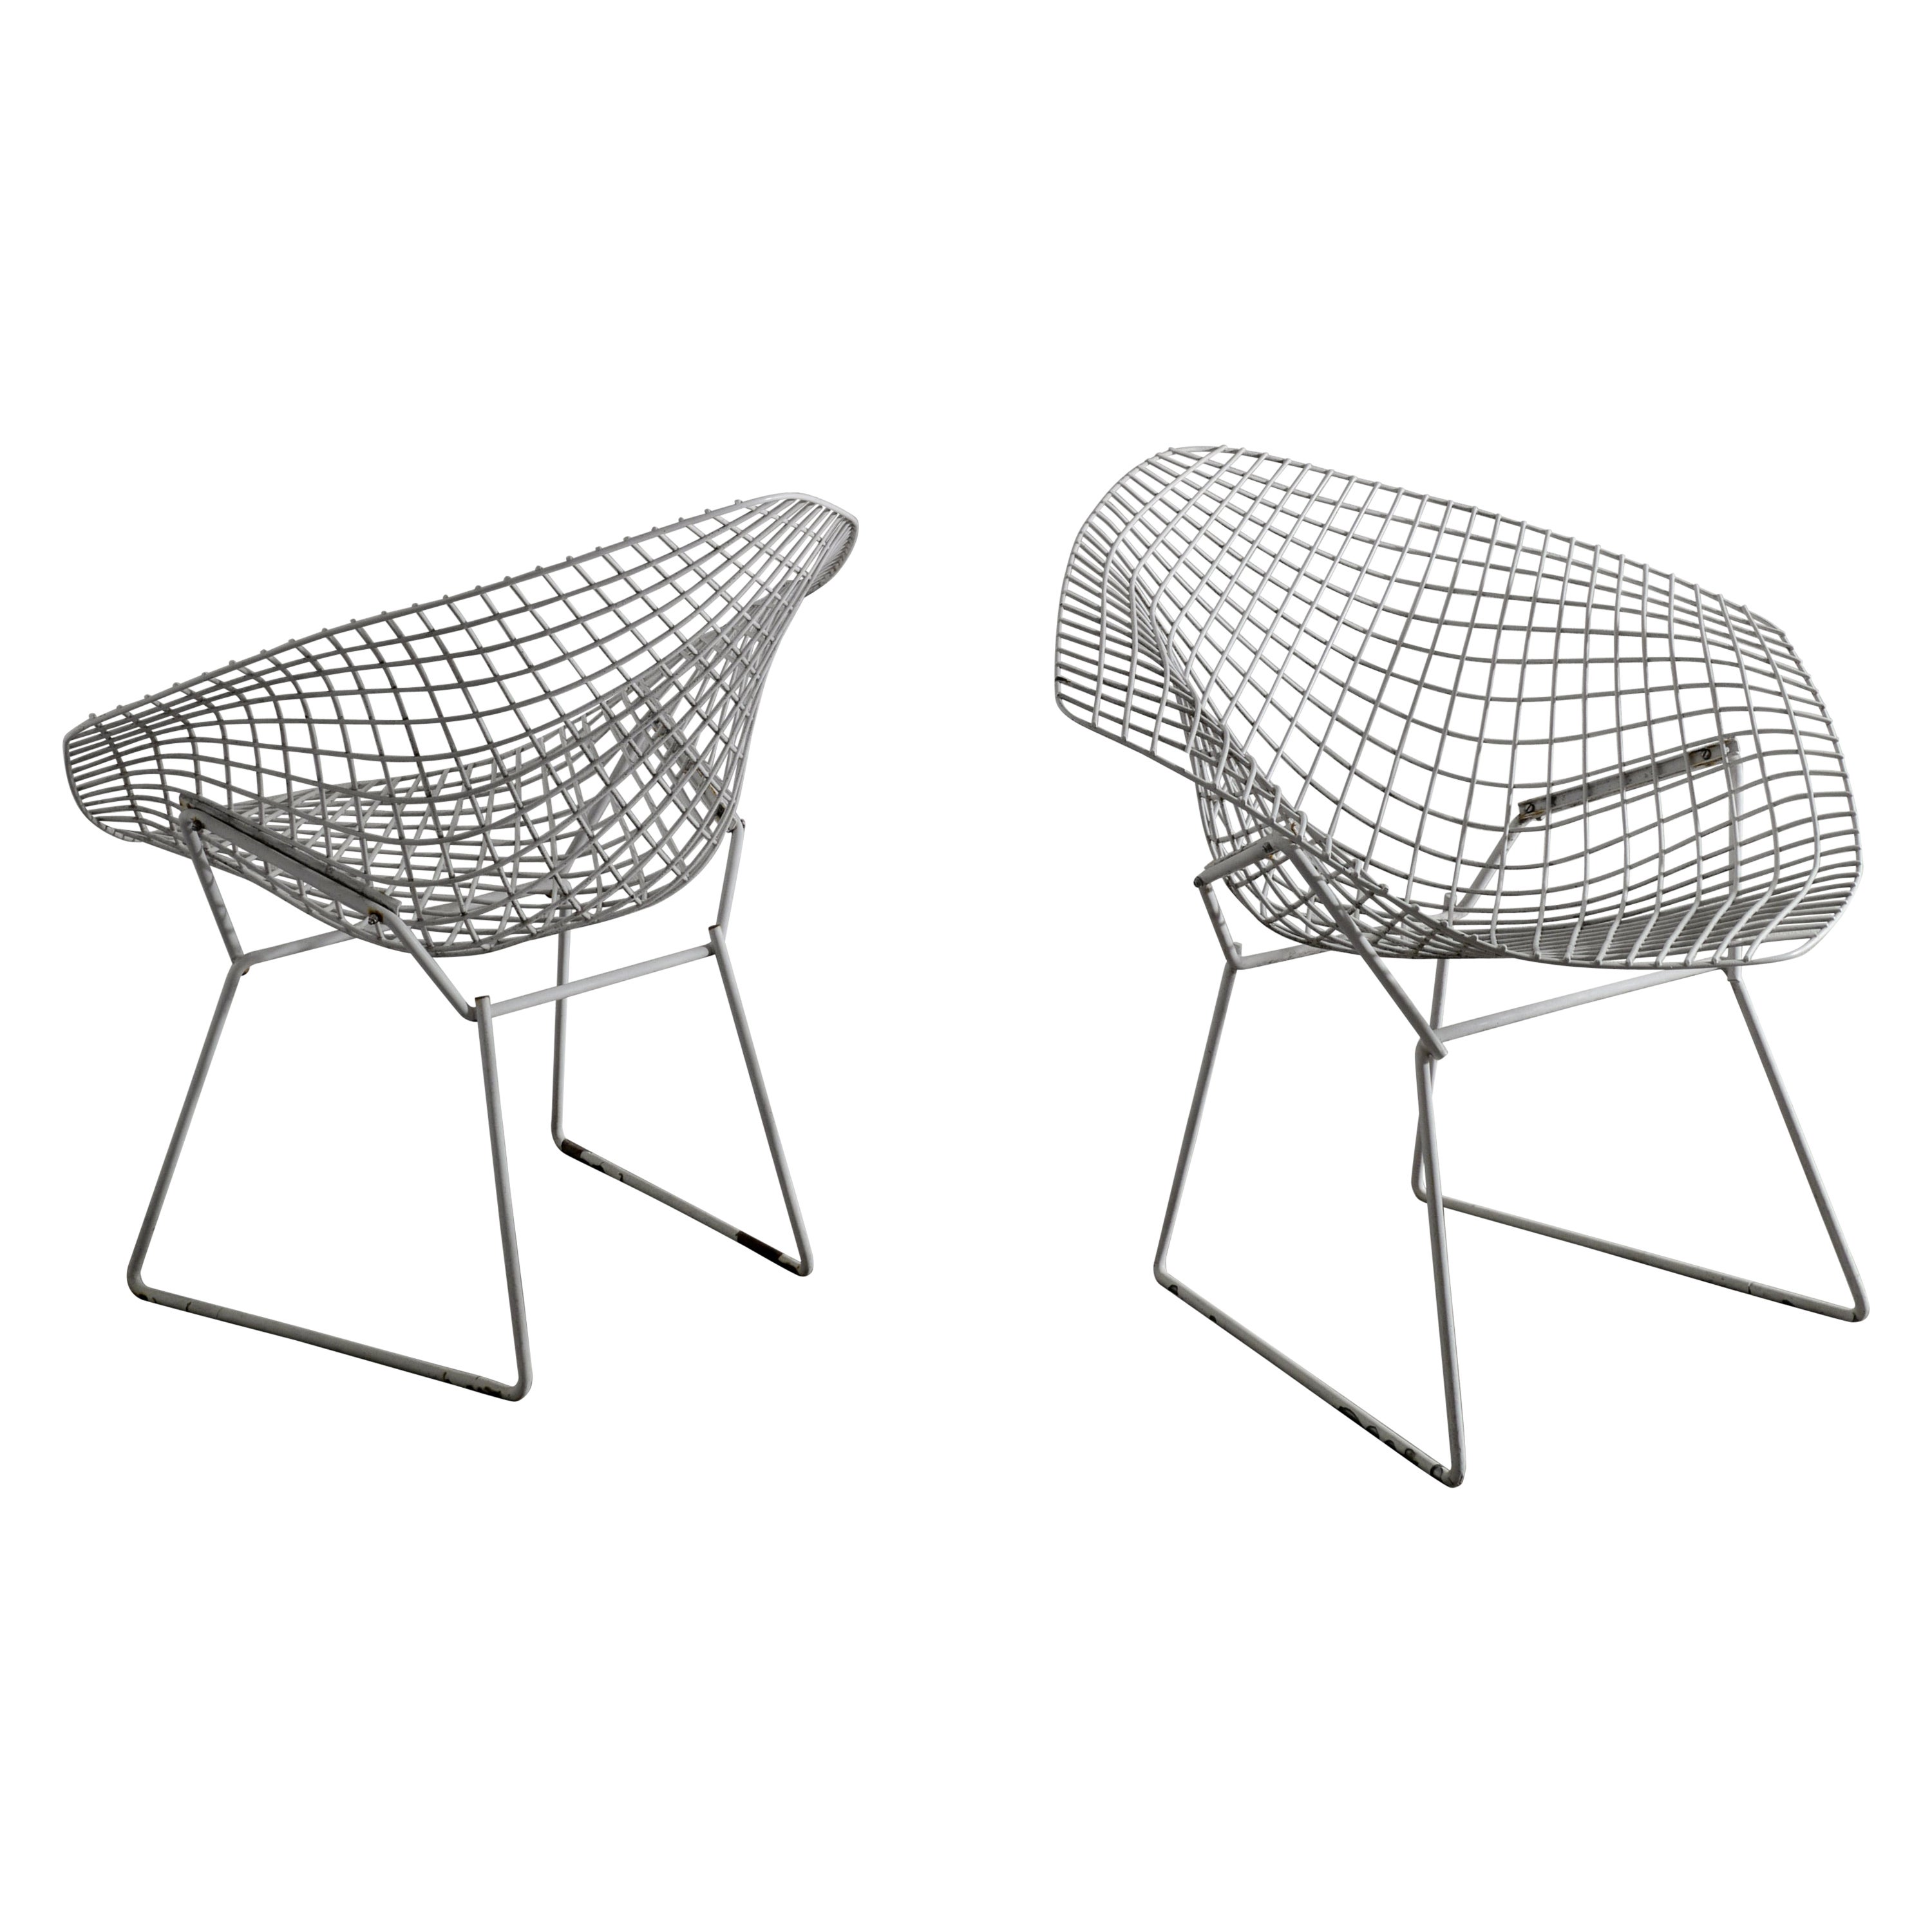 Pair of White Harry Bertoia "Diamond Chairs" Produced by Knoll, 1950s For Sale